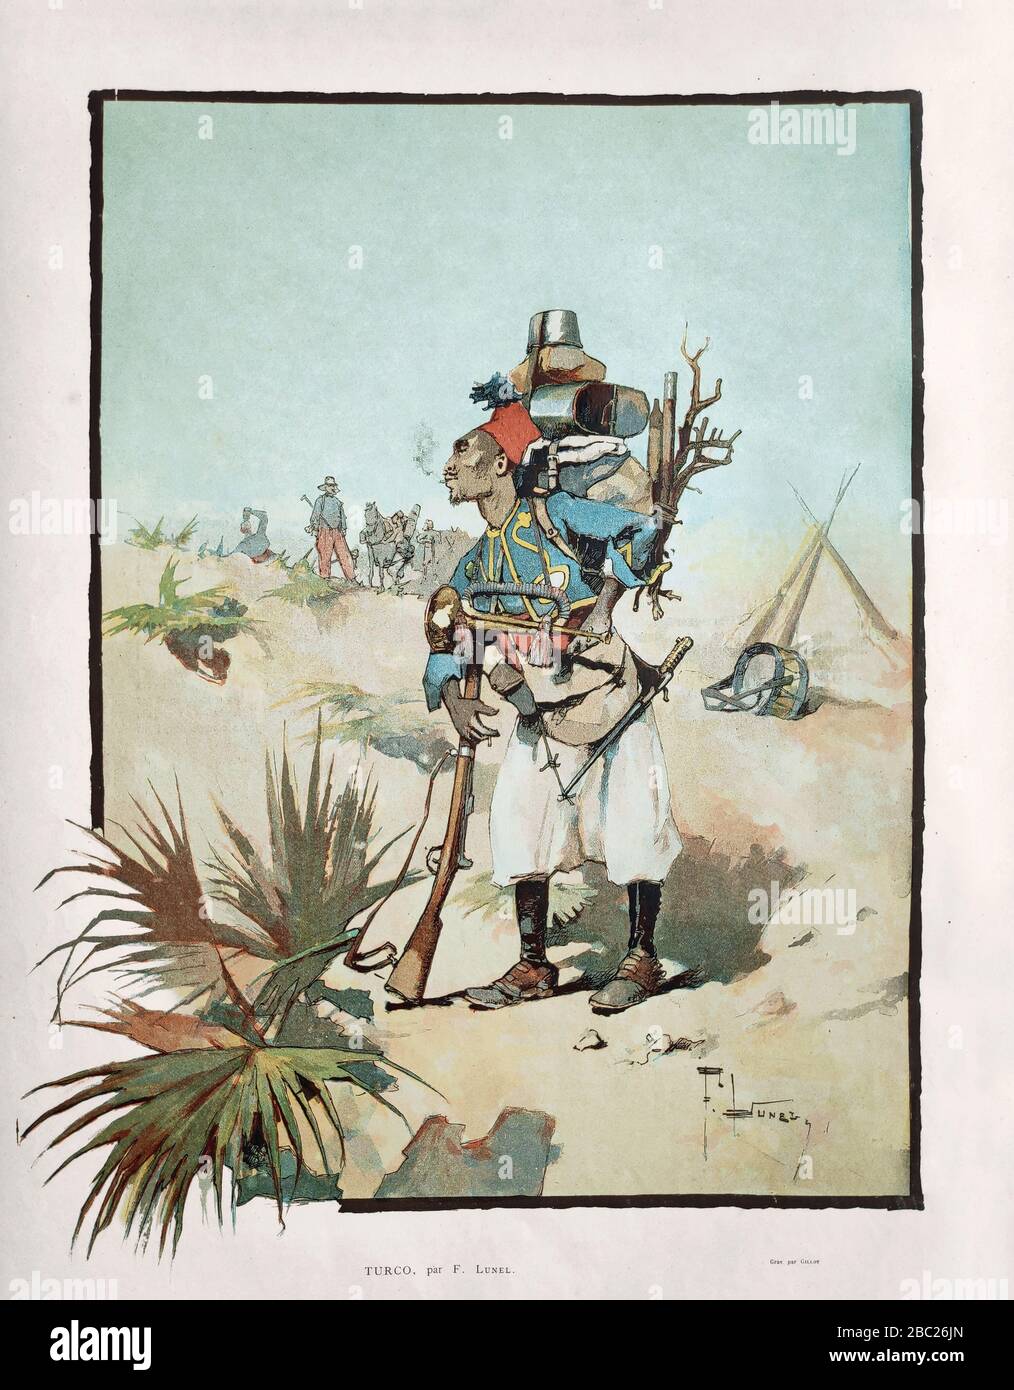 Illustration about a soldier of the Ottoman empire entitled 'Turco' by F. Lunel and engraved by Gillot published in 1884. Stock Photo